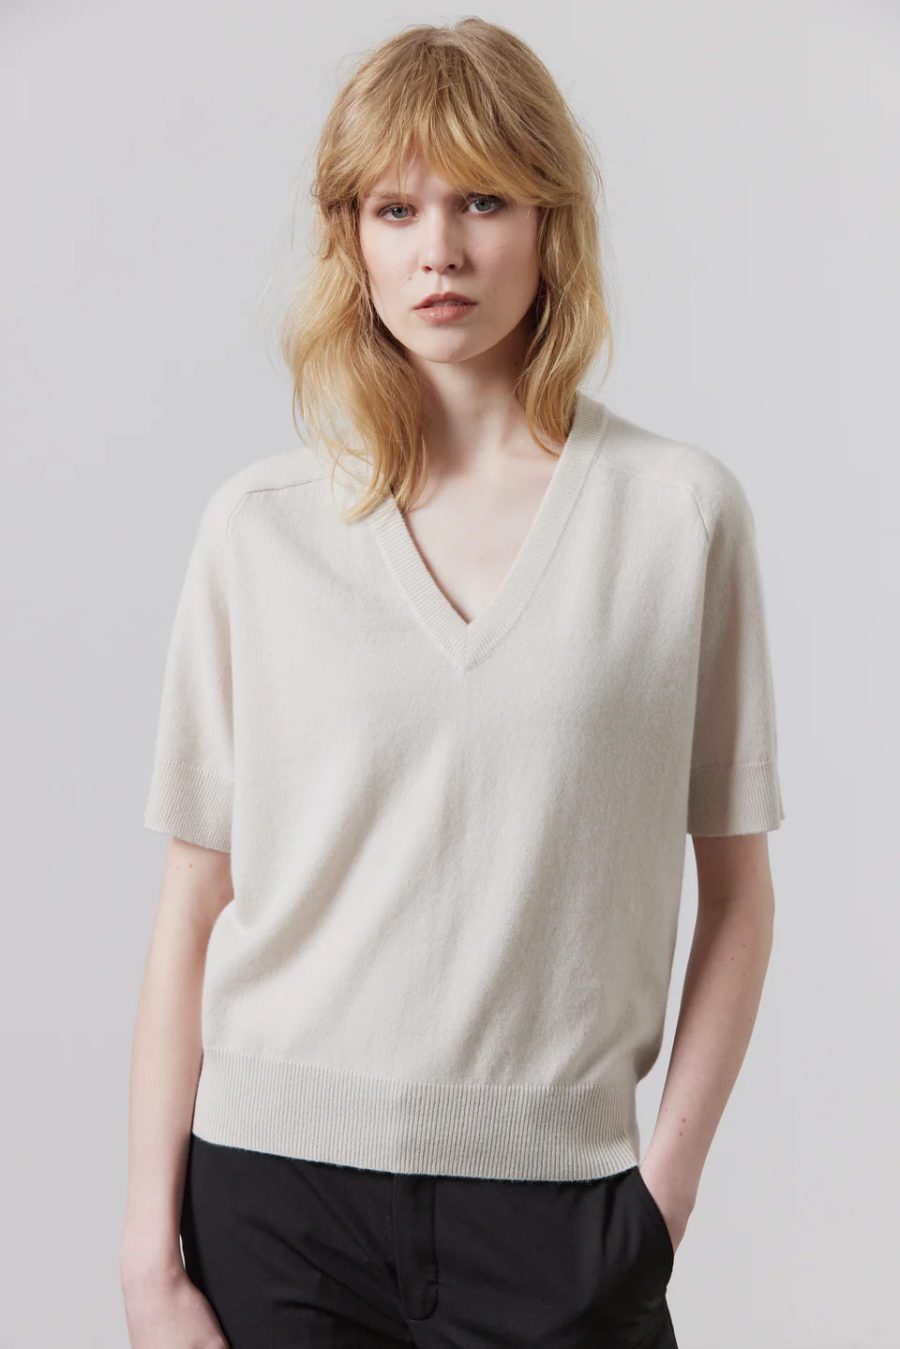 jasper cashmere v-neck tee shirt in putty laing clothing